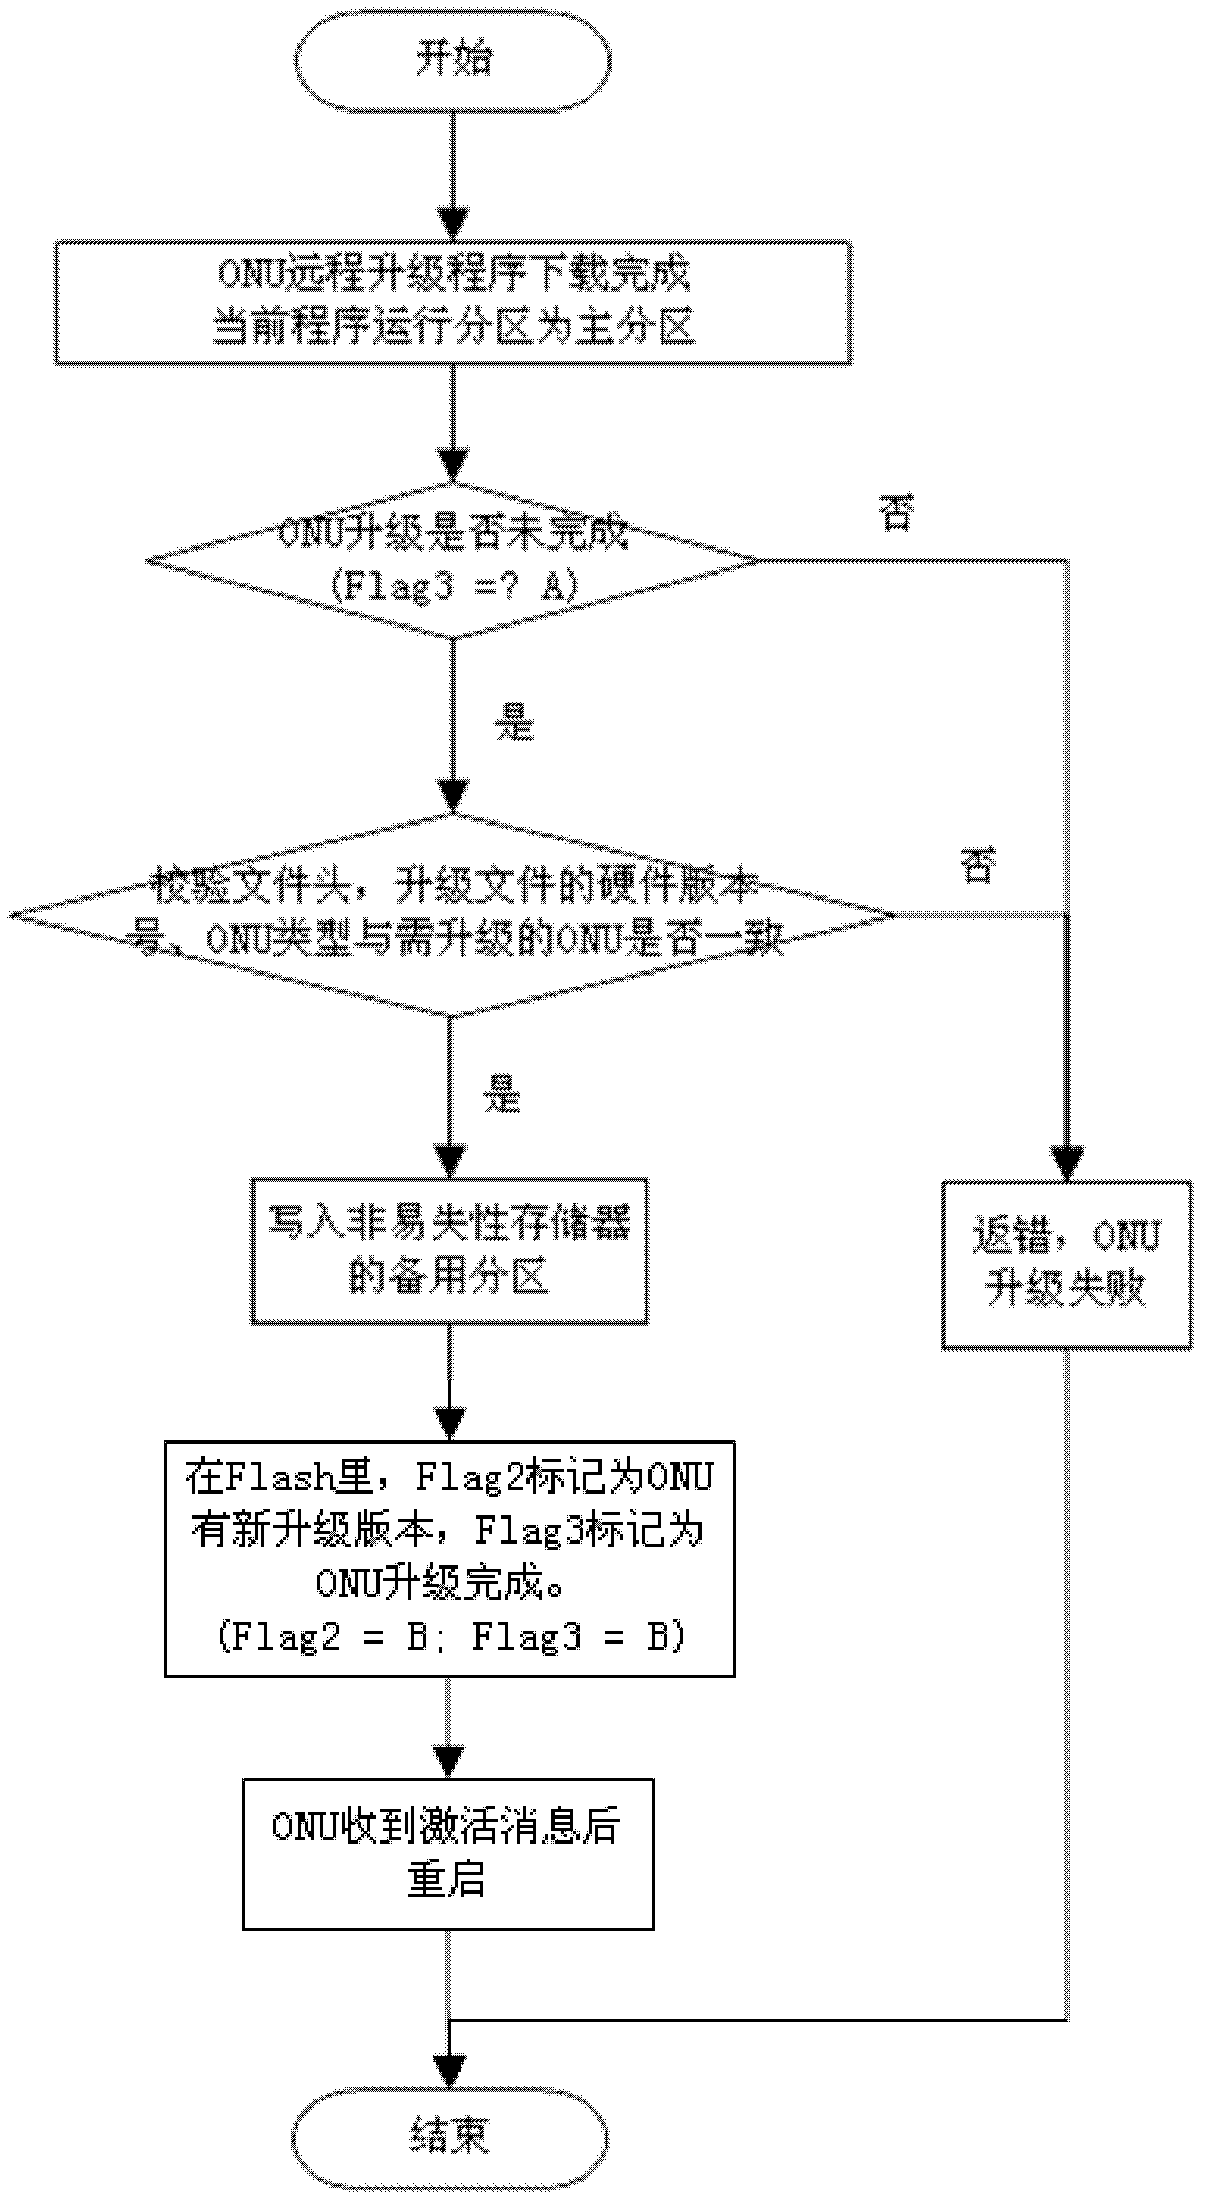 Self-protecting method for long-distance upgrading of optical network unit